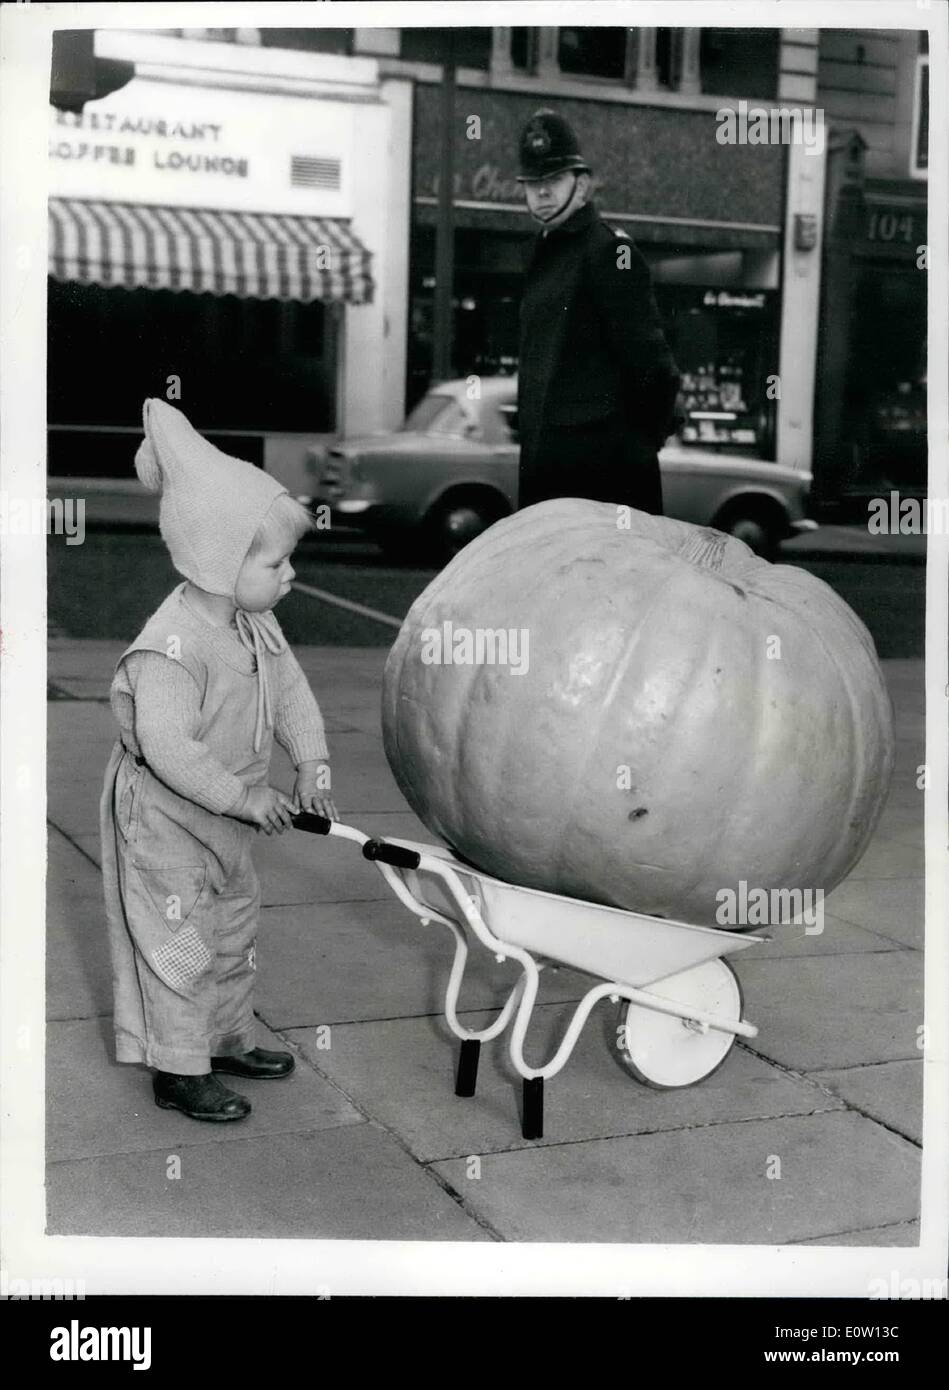 Nov. 11, 1960 - Monster Vegetables on Show 159 Lb. Pumpkin: Prizewinners in a competition sponsored by Garden News to find the Country's biggest vegetables, were on display today at Fisons Garden Centre, Wigmore-street. One of the giant exhibits on display was a pumpkin, weighing 159 lbs, with a circumference of 84 inches, which was grown in a garden measuring only 9 feet wide, by Mr. W.E. Everett , of Walsham Le Willows, Suffolk Stock Photo